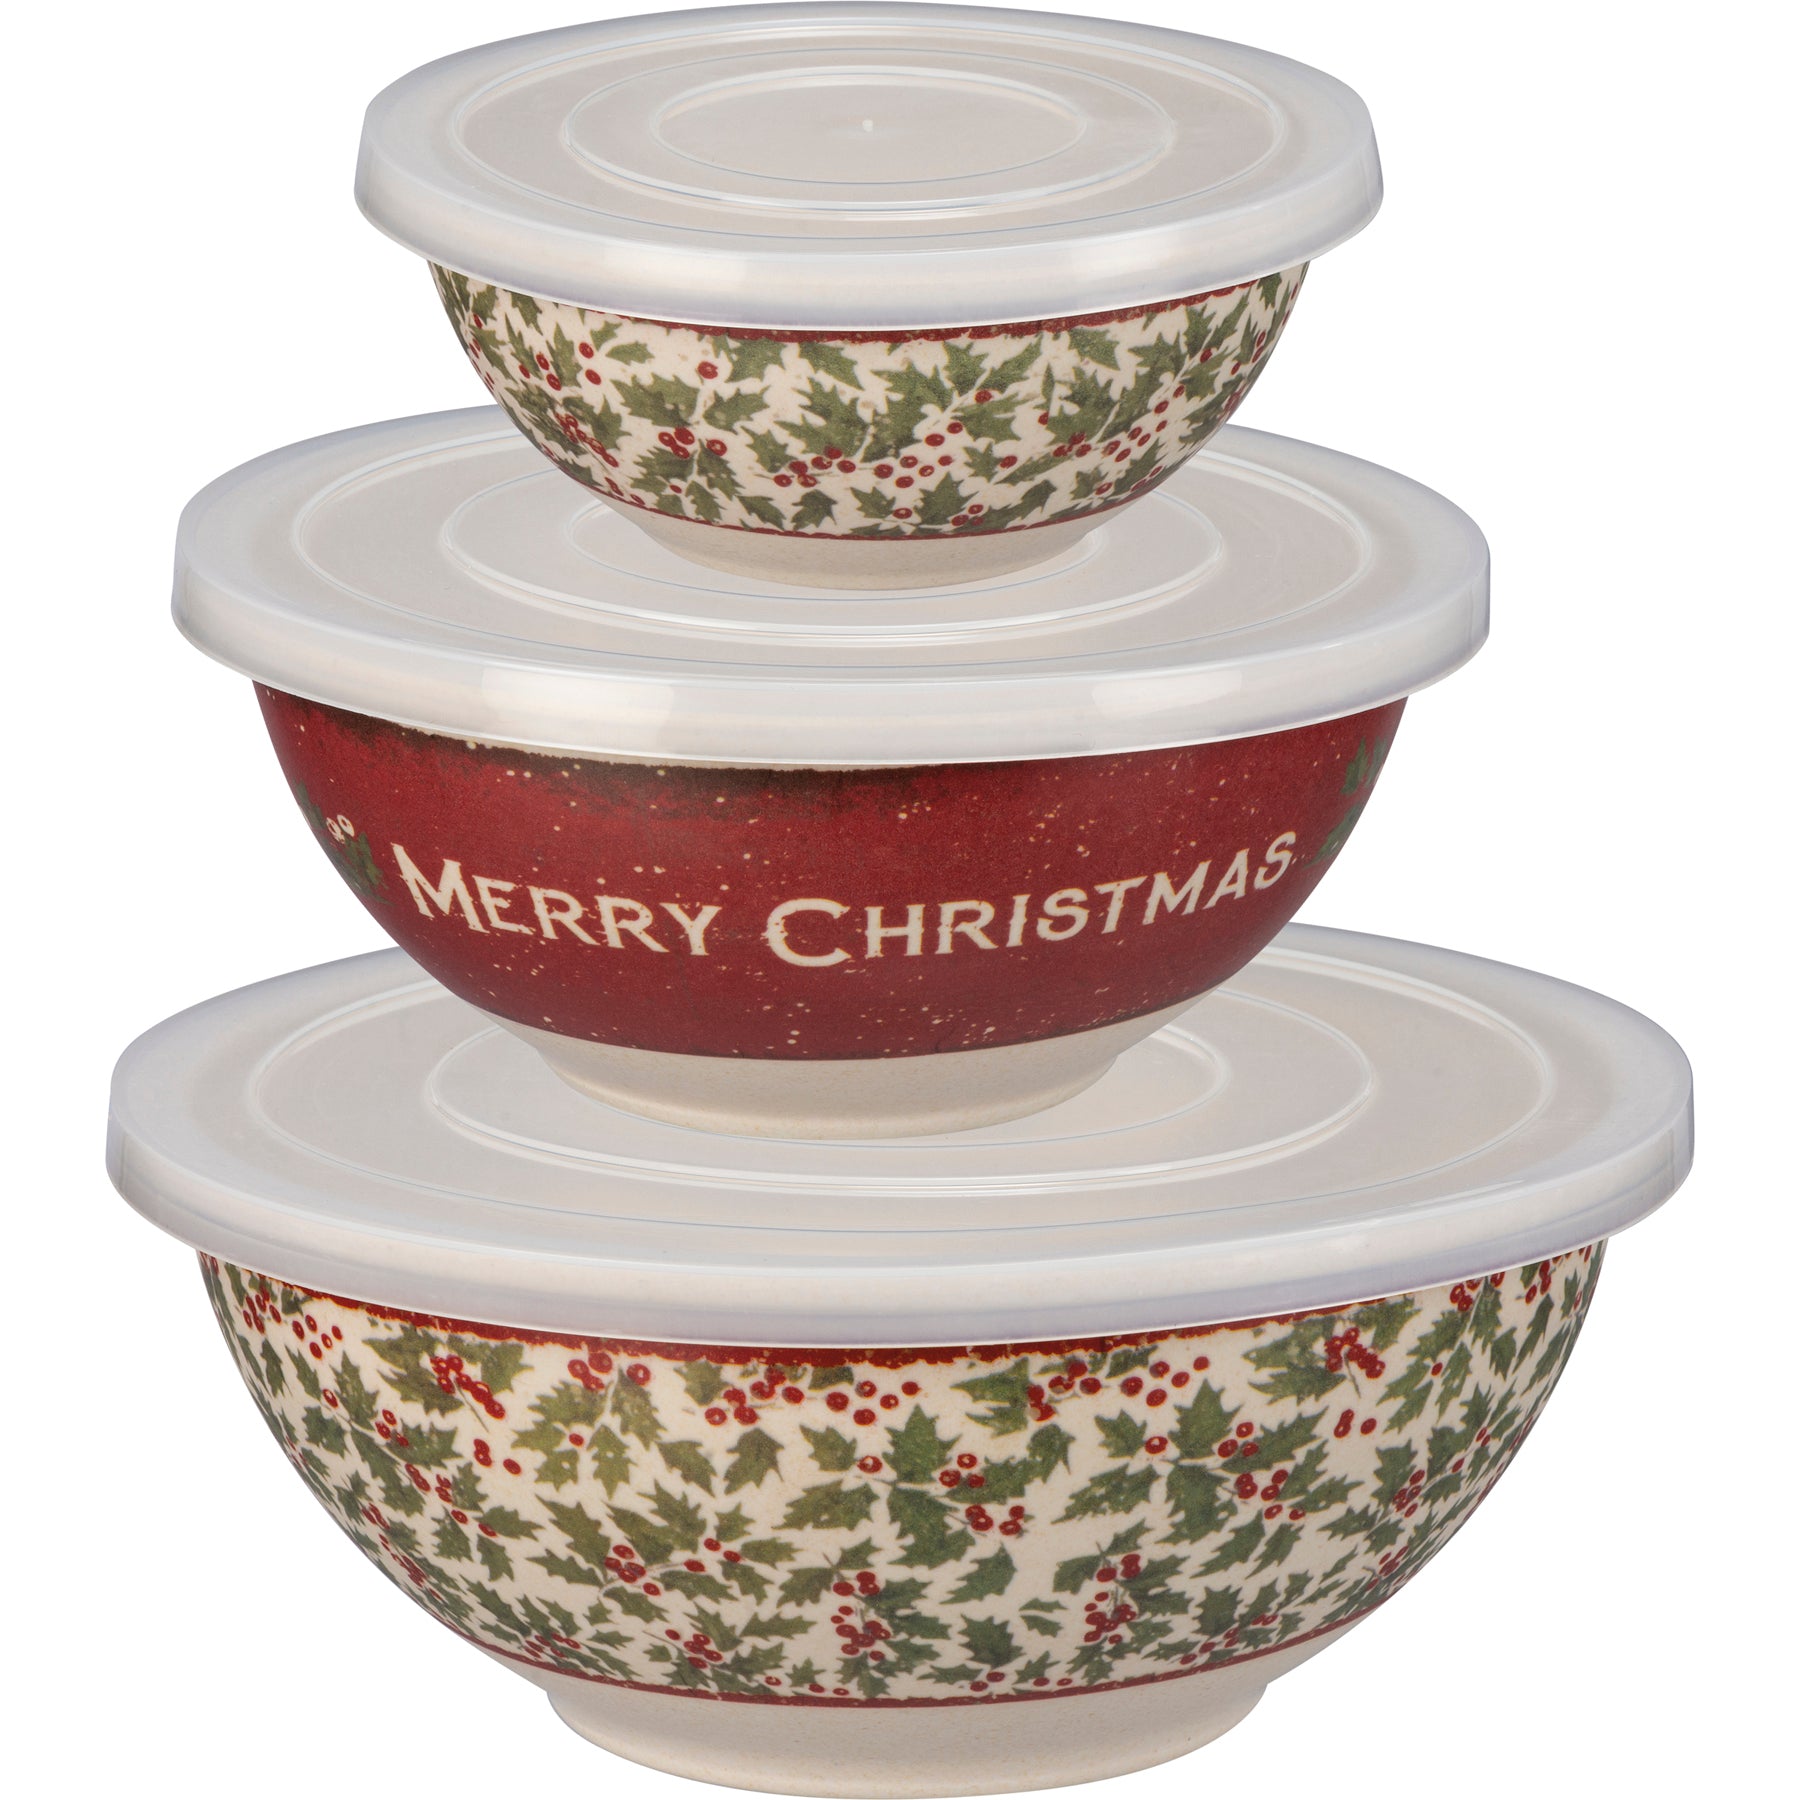 Merry Christmas Bowl Set of 3 nesting bamboo bowls with vintage inspired Christmas designs.